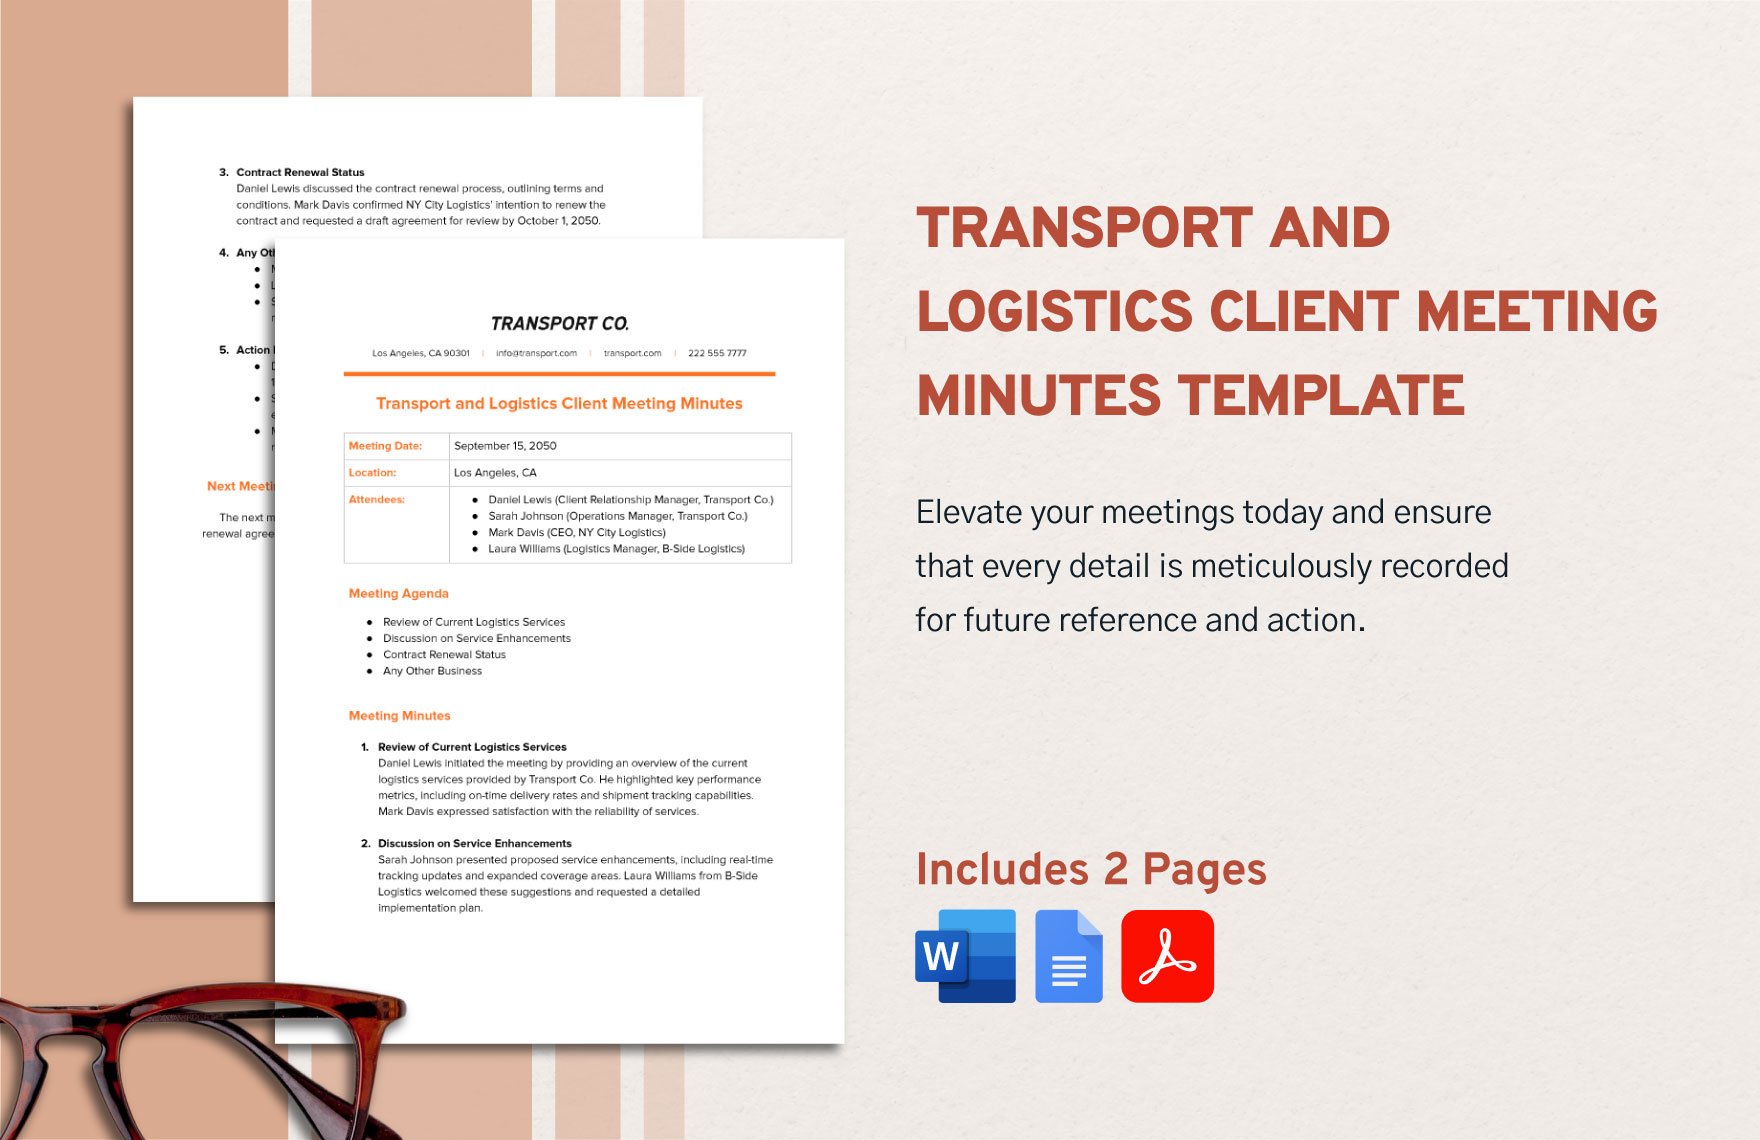 Transport and Logistics Client Meeting Minutes Template